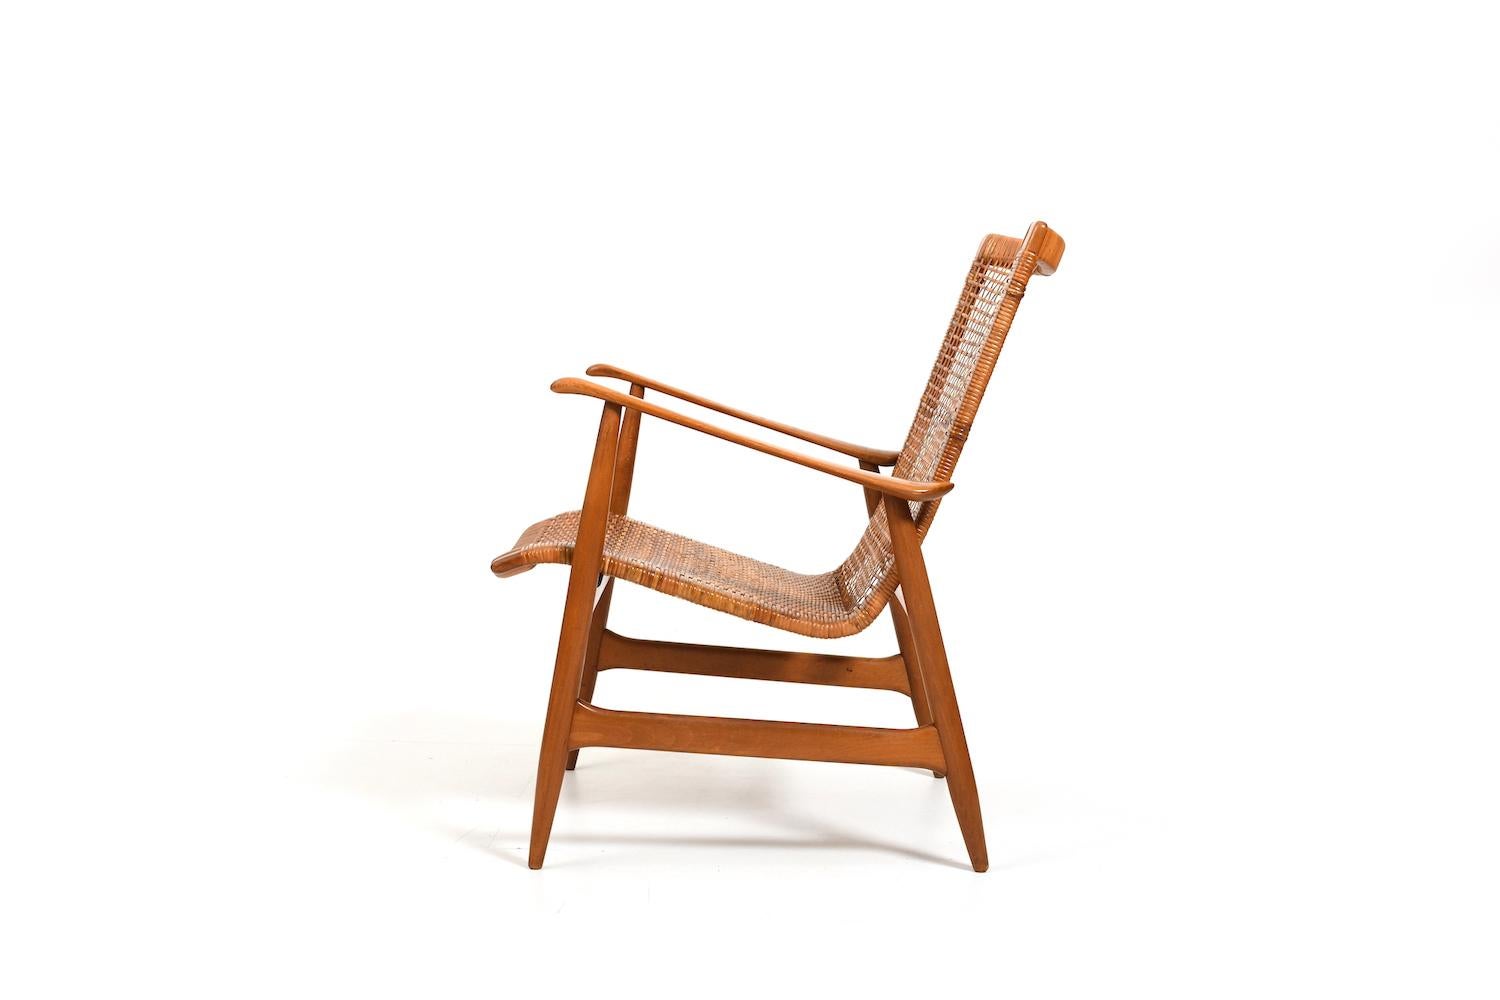 Early 1950s danish easychair with cane and organic shaped form. Made in beech wood. In order to preserve the old structure, we only had a few small broken areas of the cane professionally renewed. The design is reminiscent of IB KOFOD LARSEN but